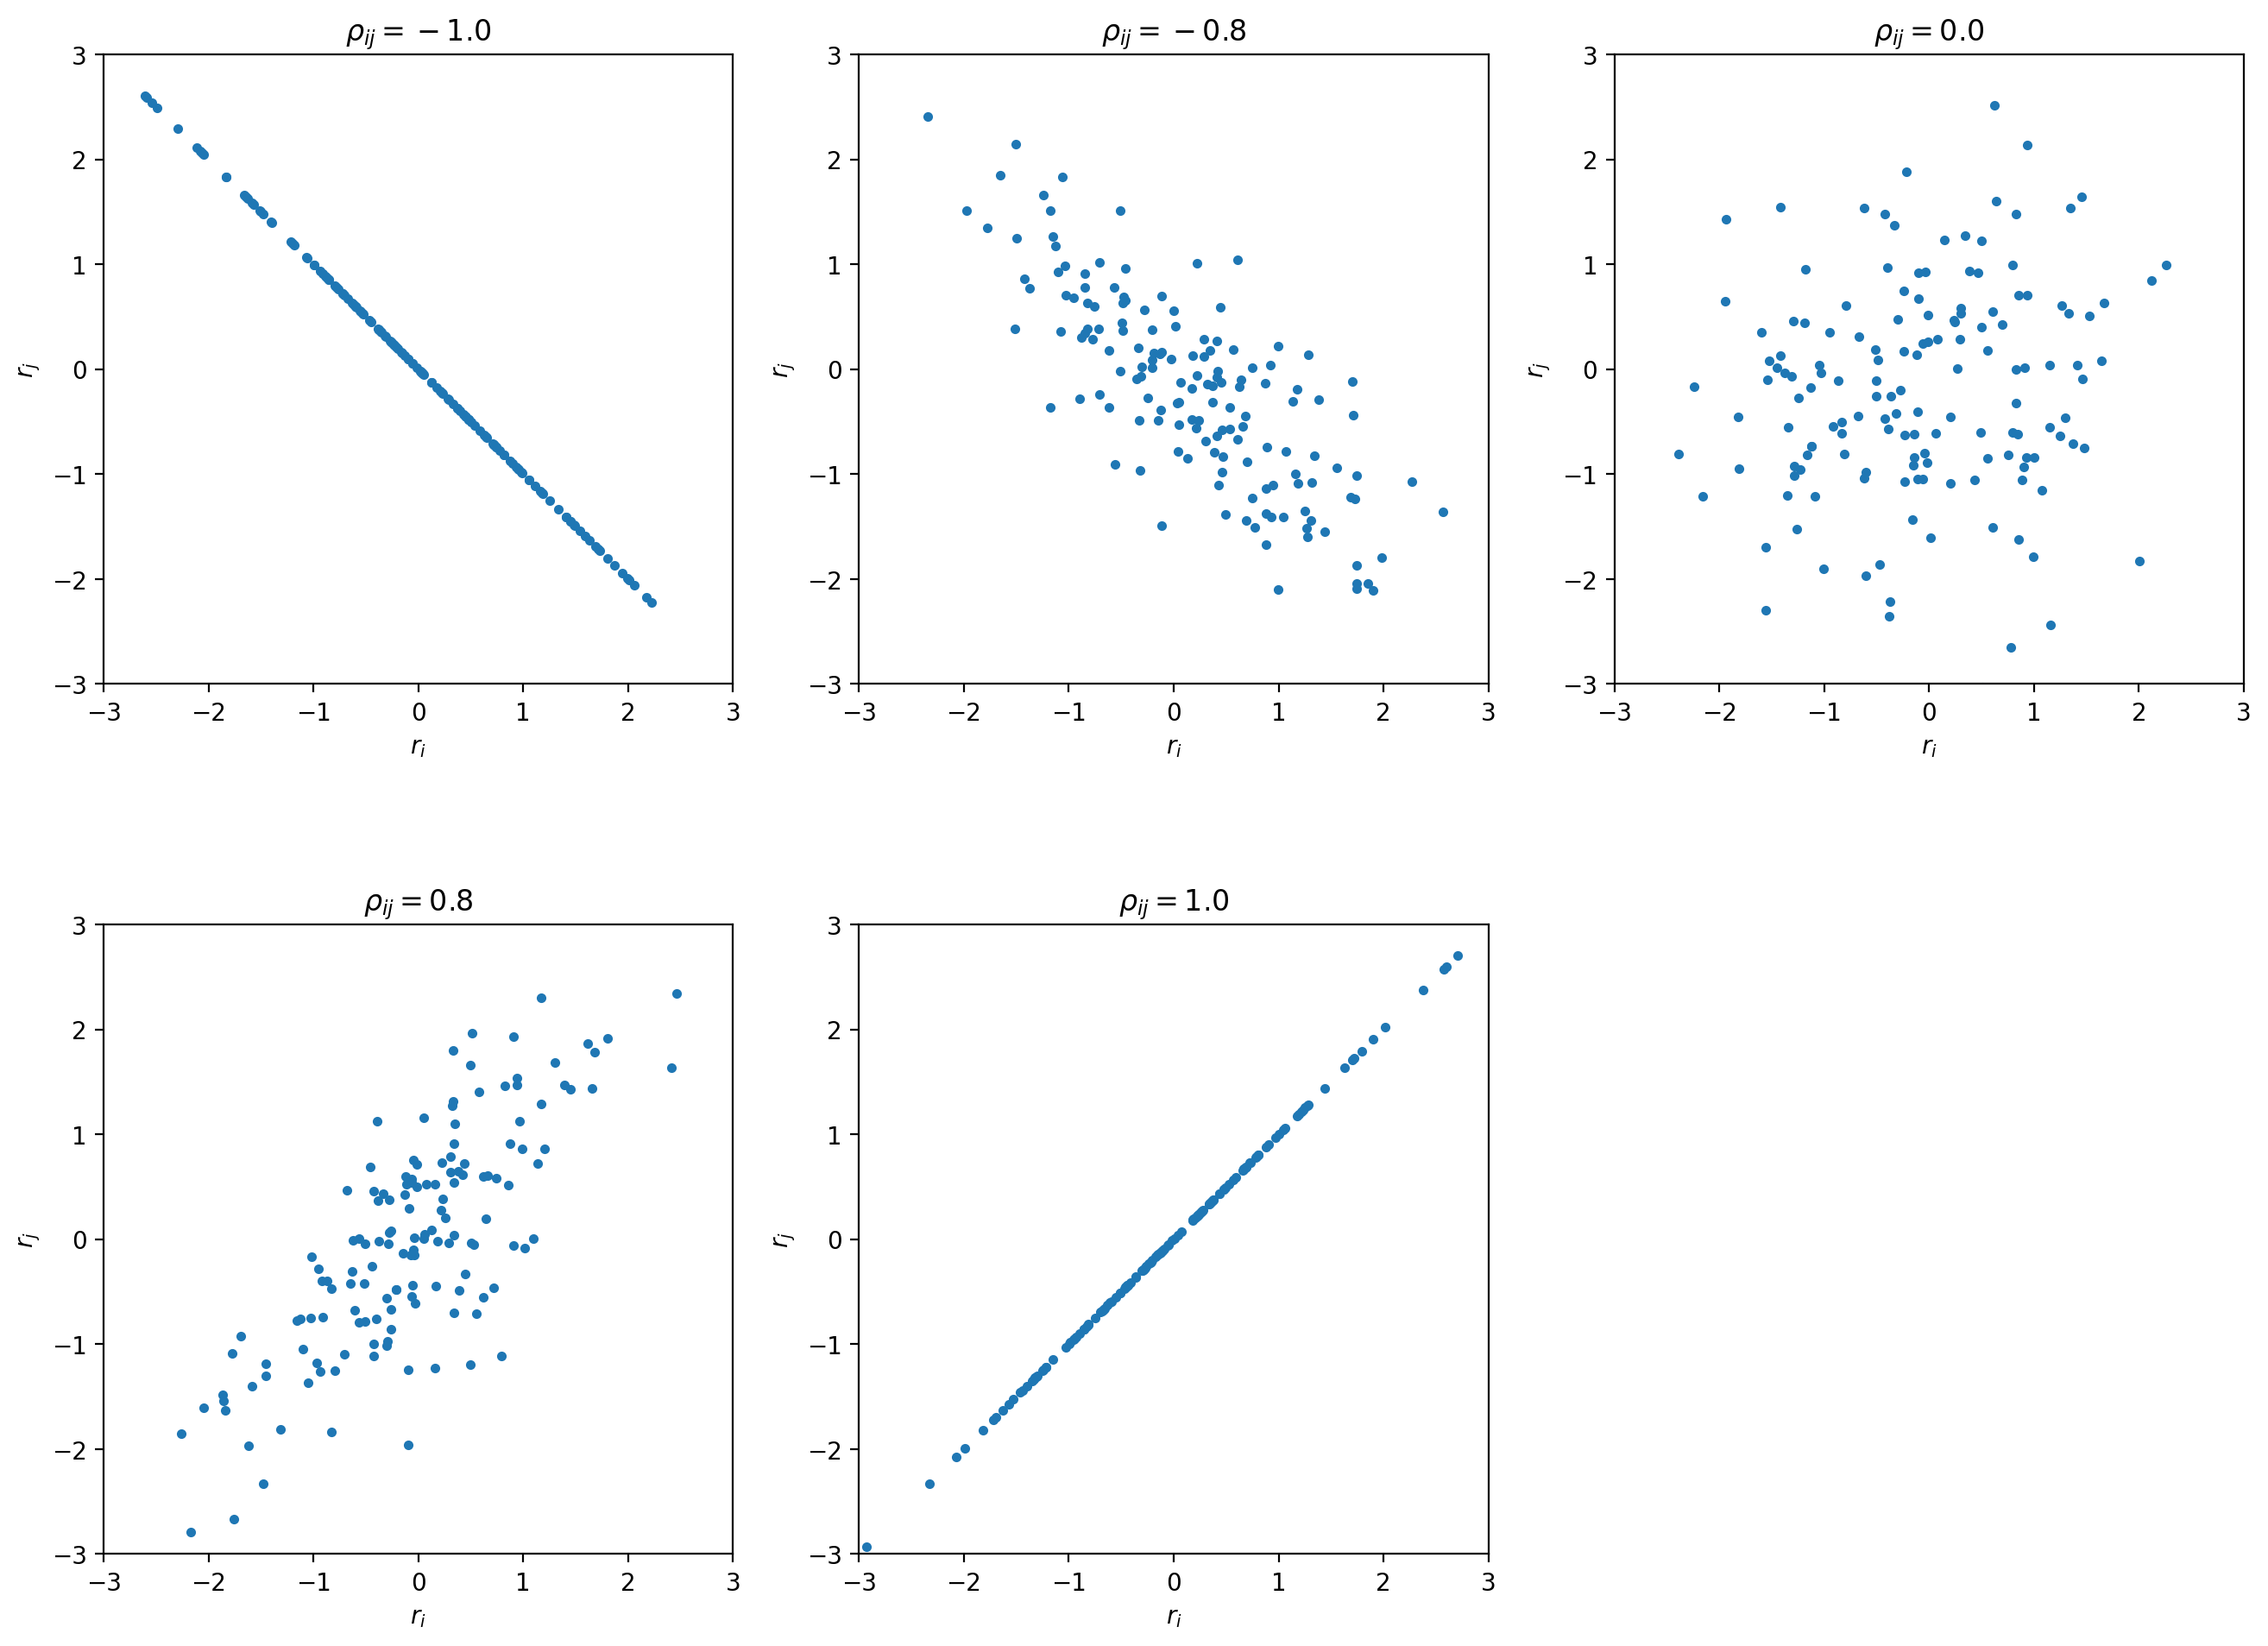 ../_images/covariance_plot.png